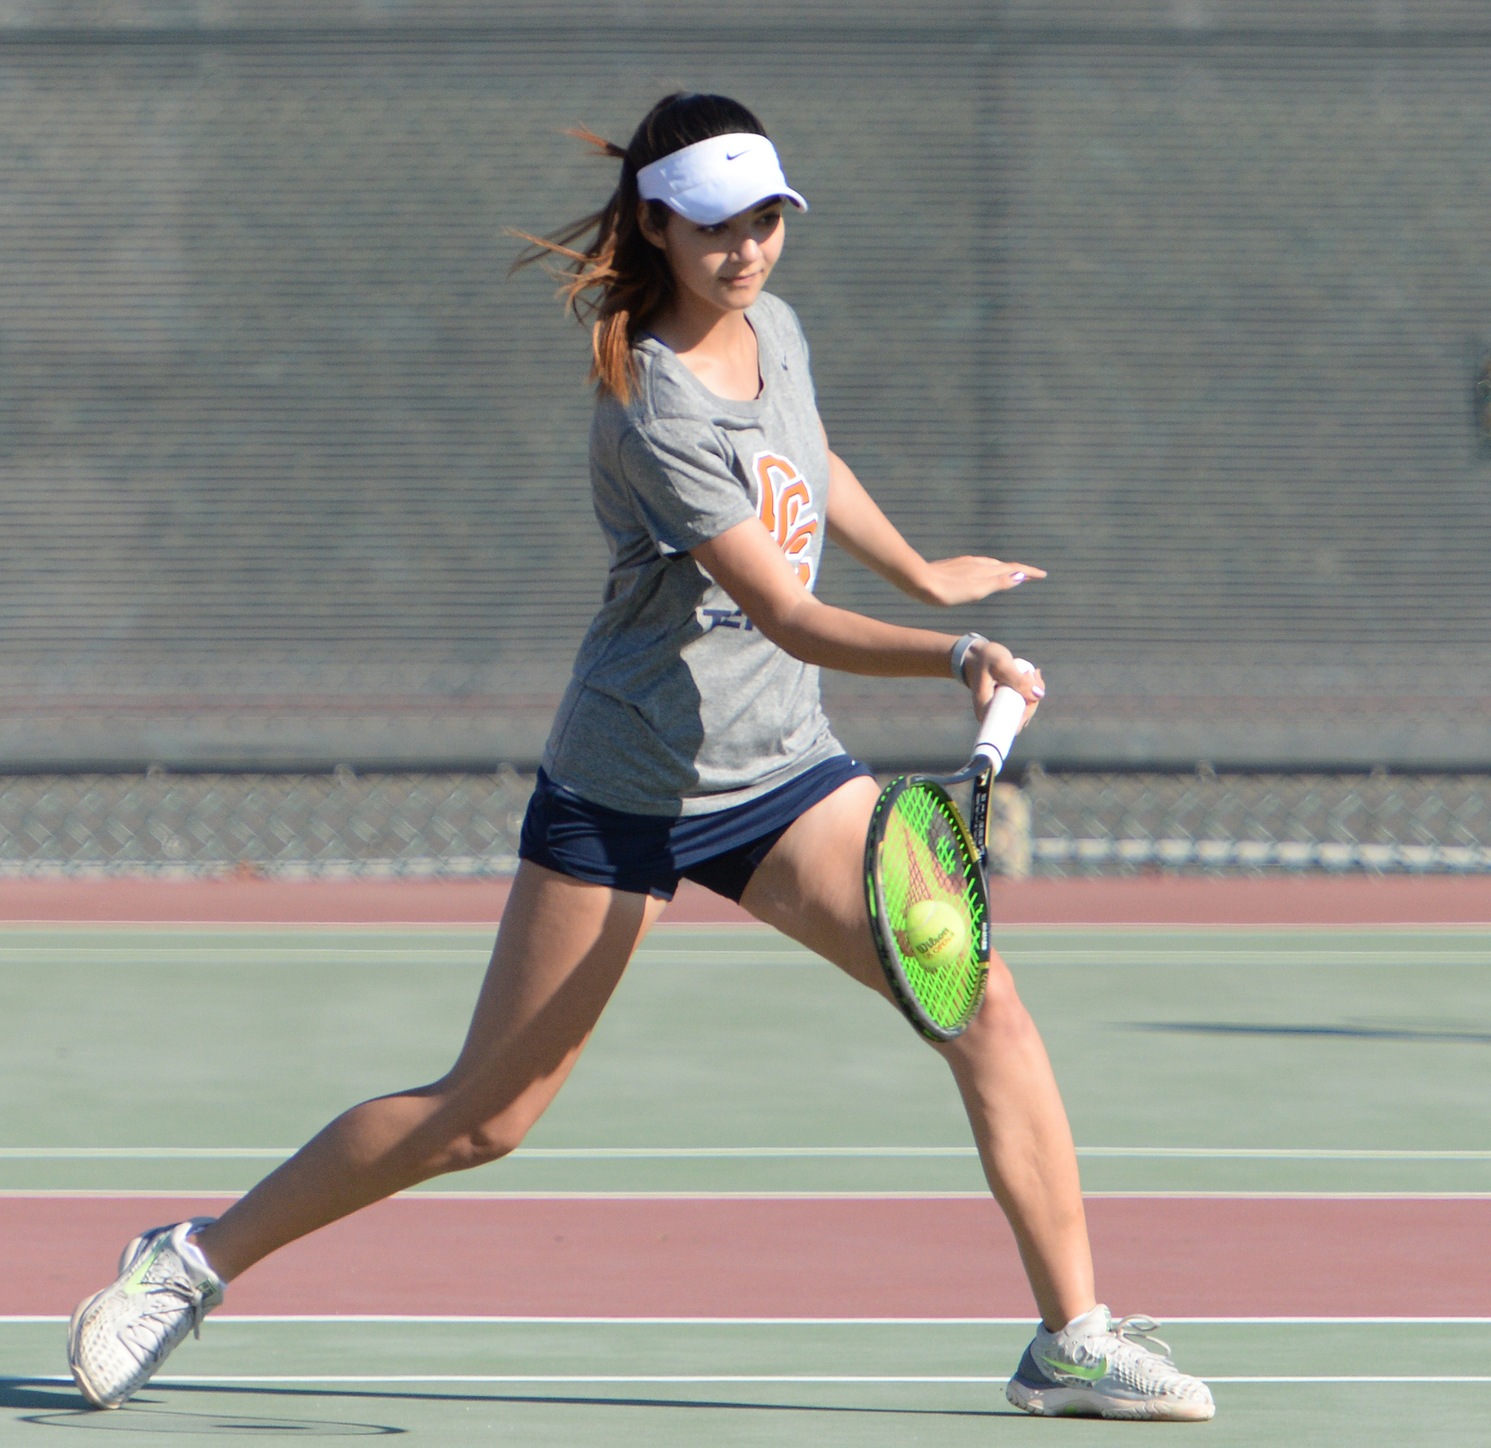 Pirates remain unbeaten with 8-1 win over Fullerton